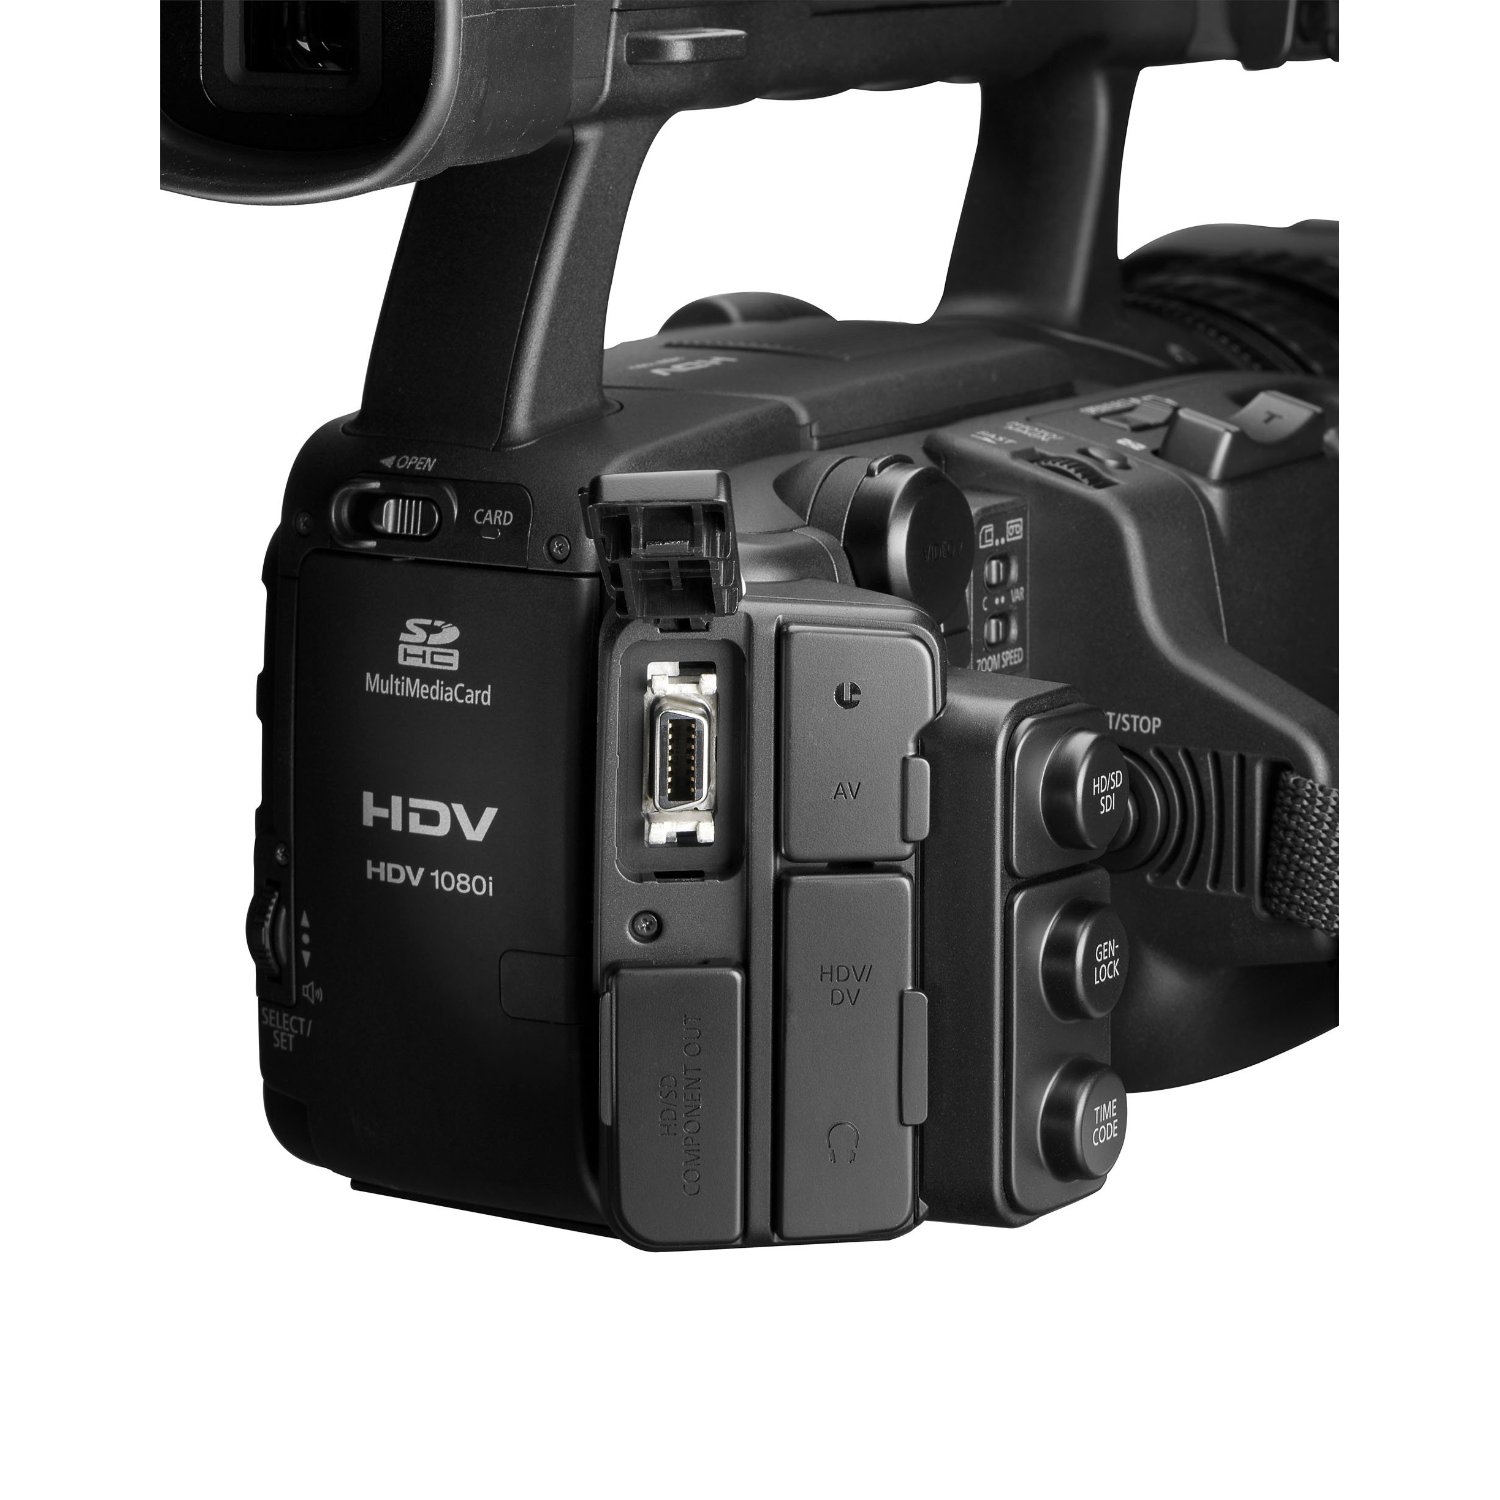 http://thetechjournal.com/wp-content/uploads/images/1111/1321357378-canon-xha1s-3ccd-hdv-high-definition-professional-camcorder--11.jpg